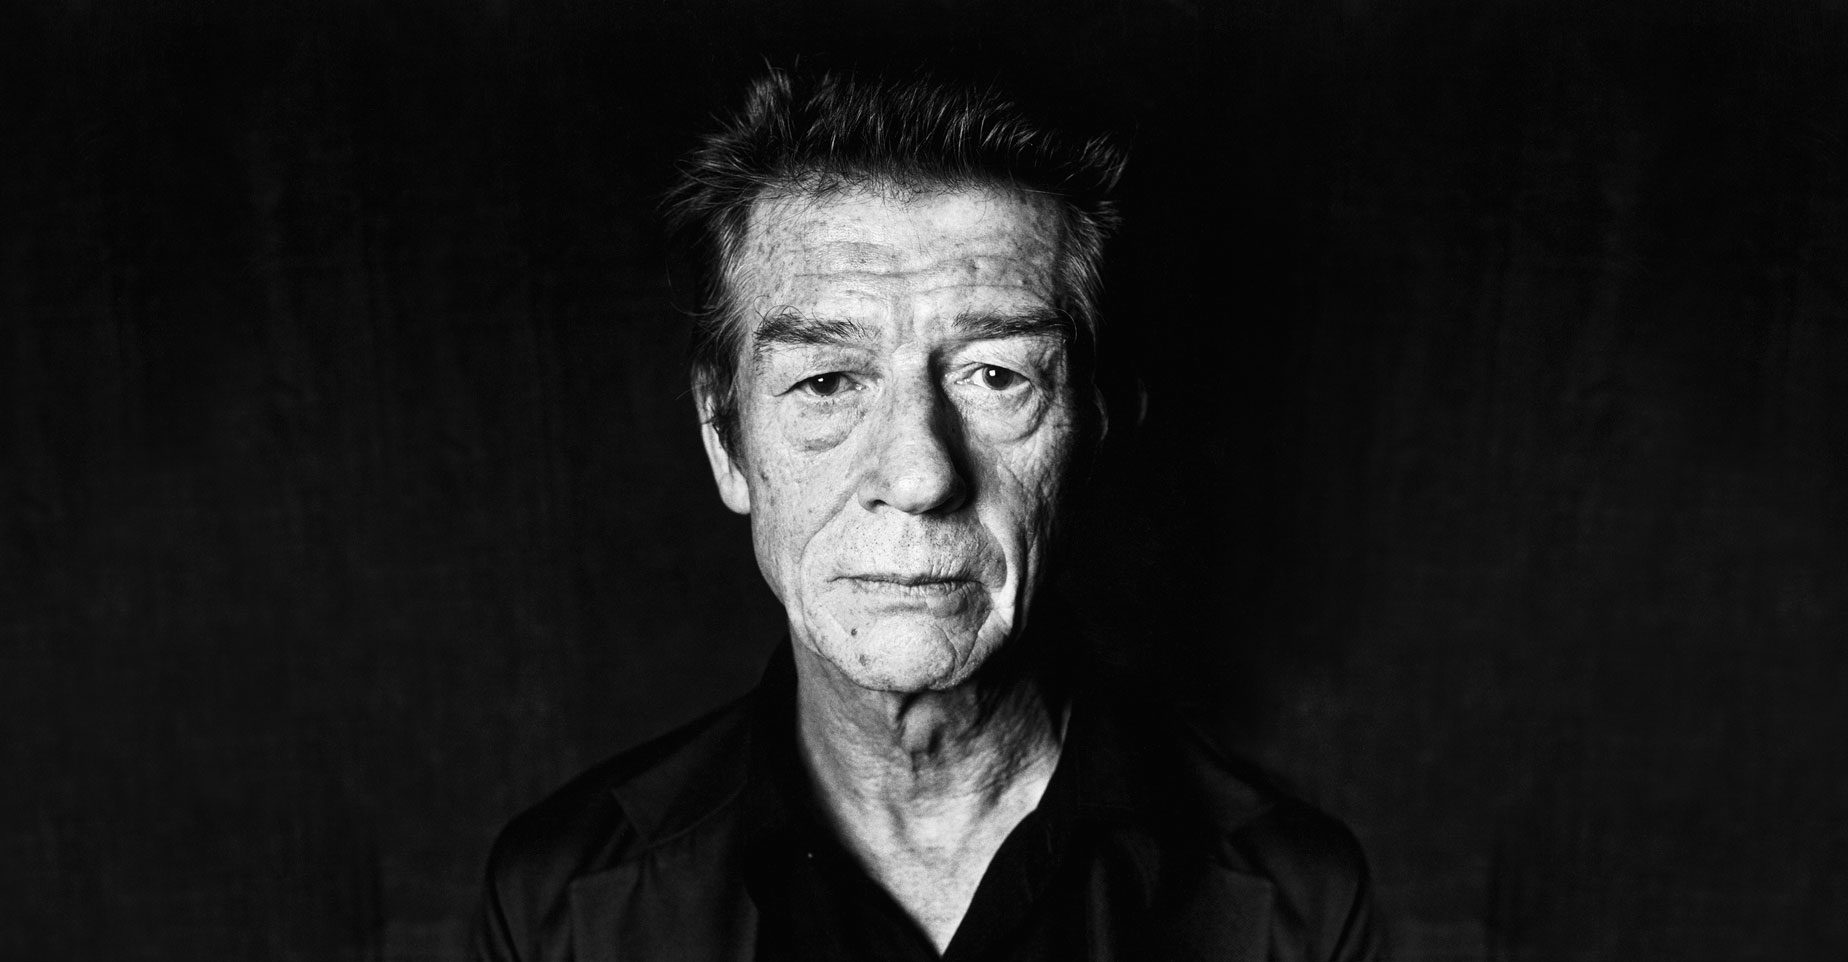 Remembering John Hurt Through Some of His Best Roles